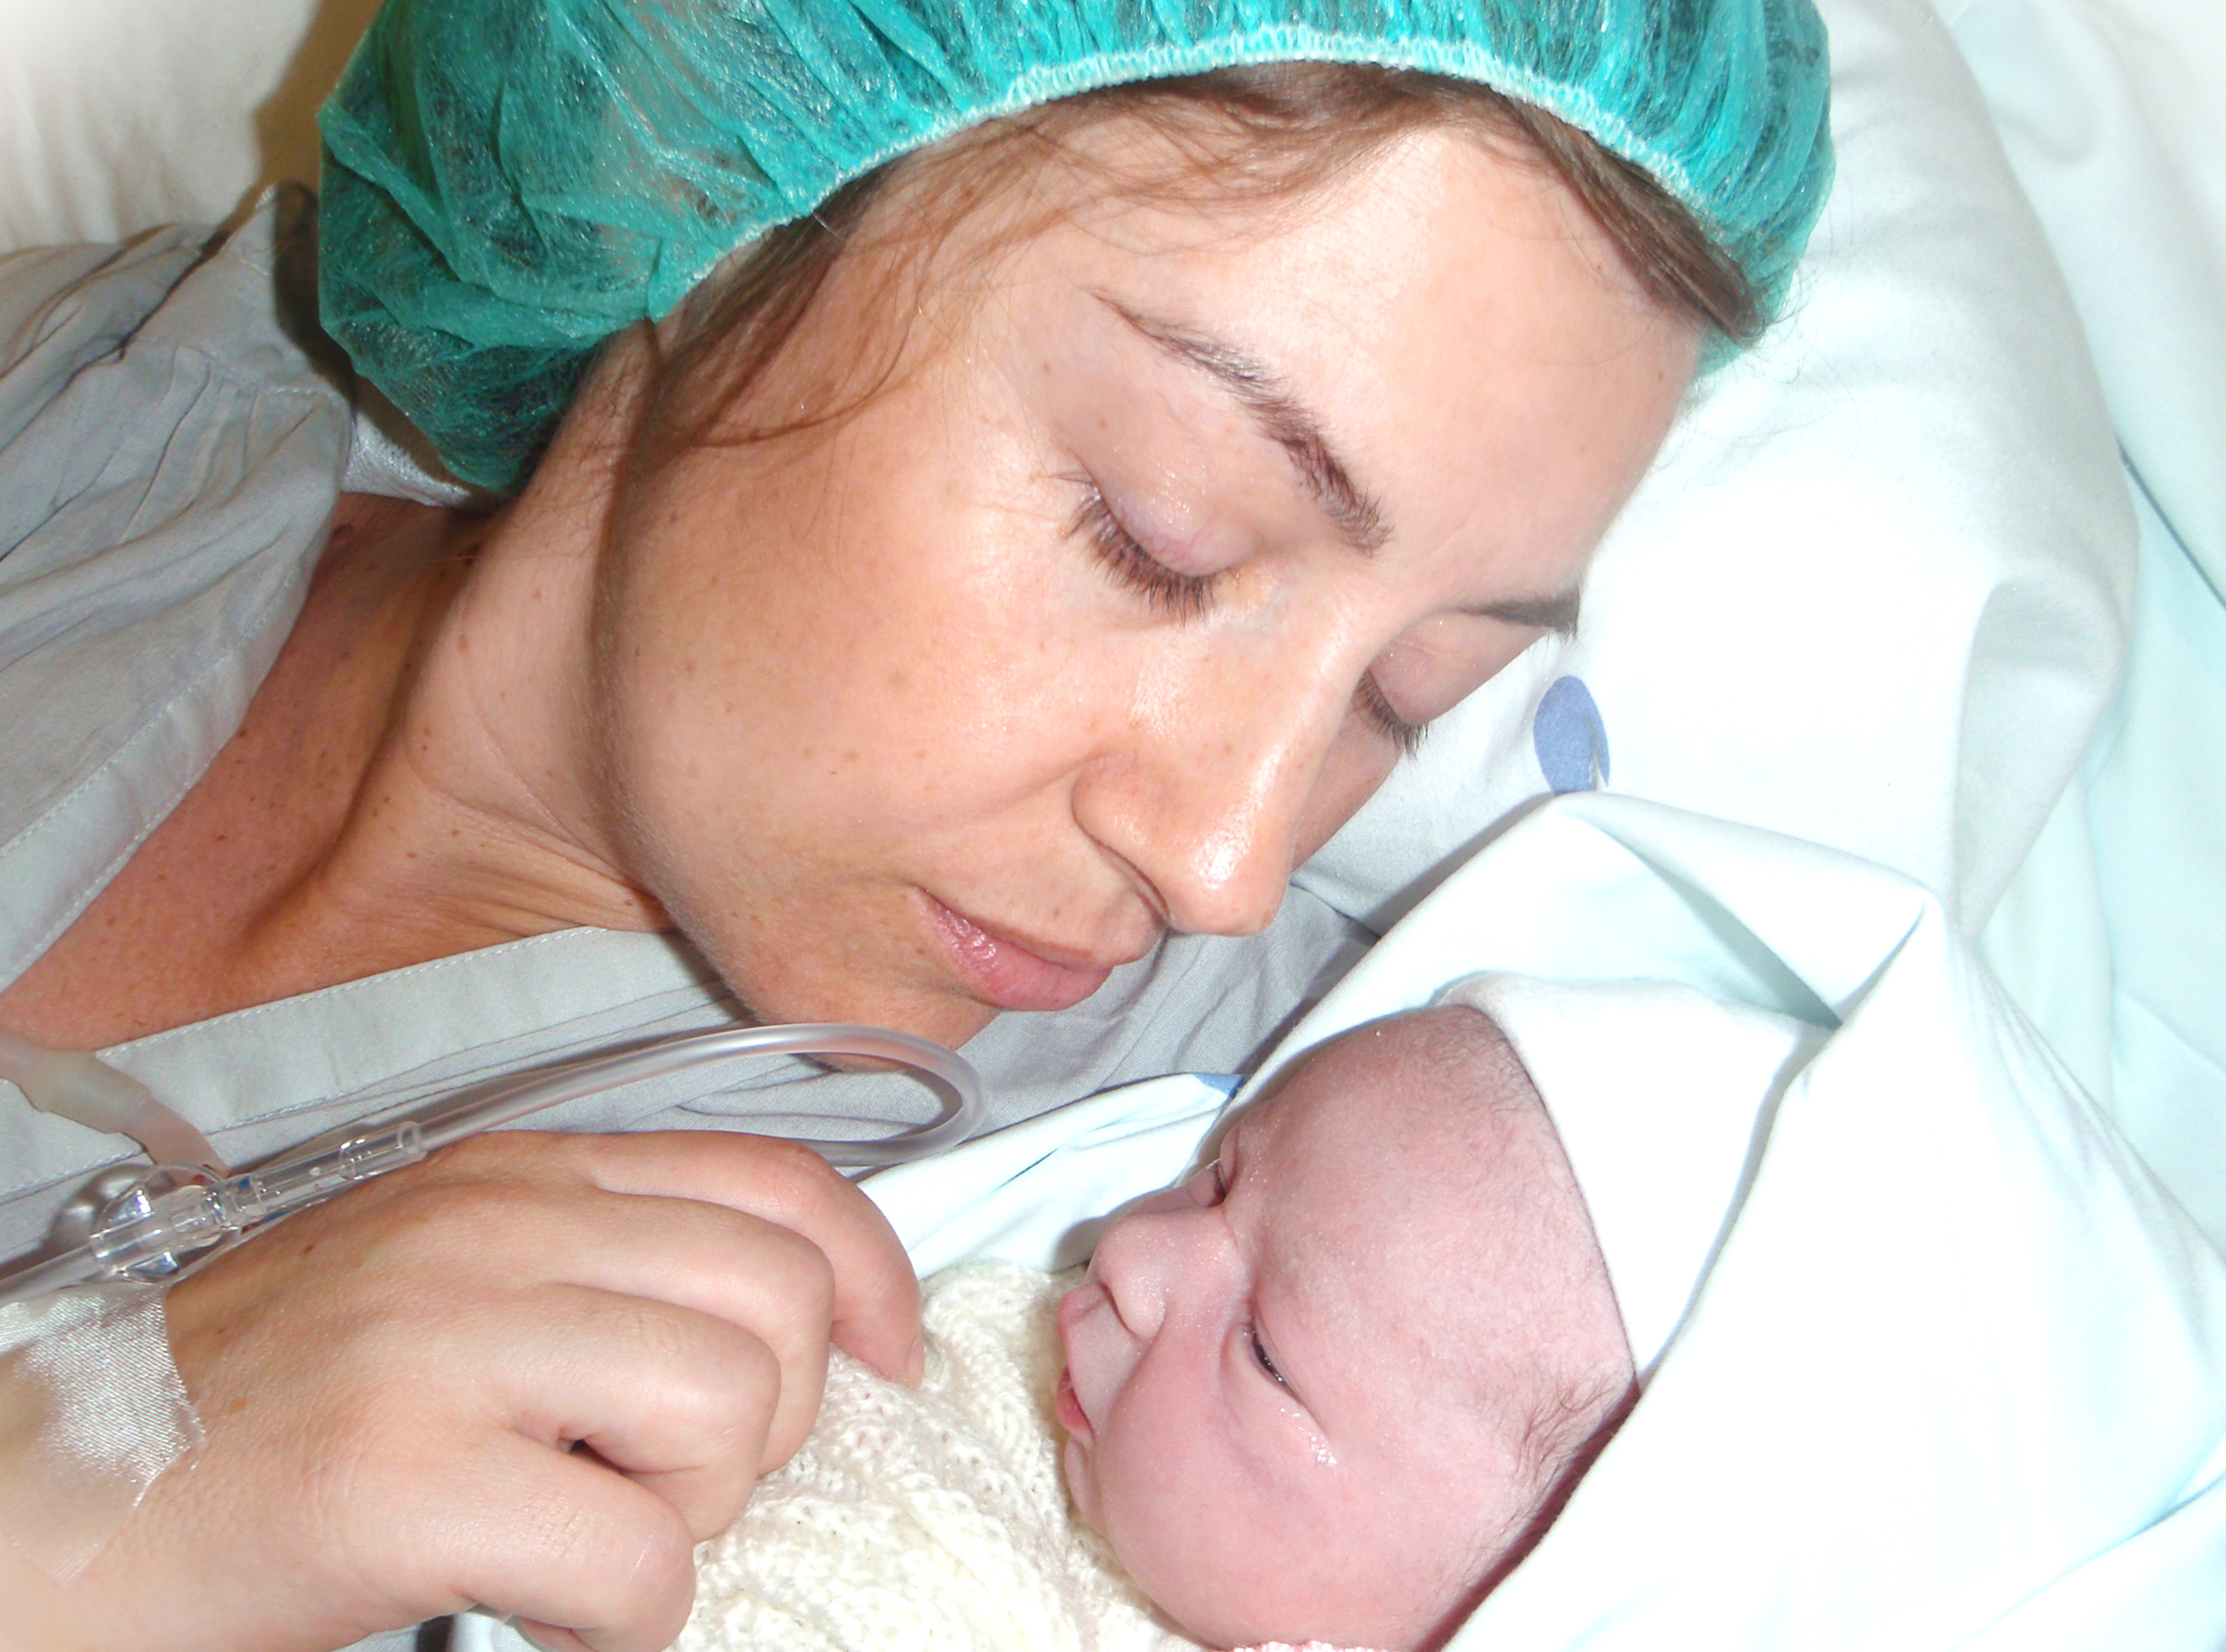 Mother in the hospital with newborn baby, Adorable, Newborn, Little, Love, HQ Photo